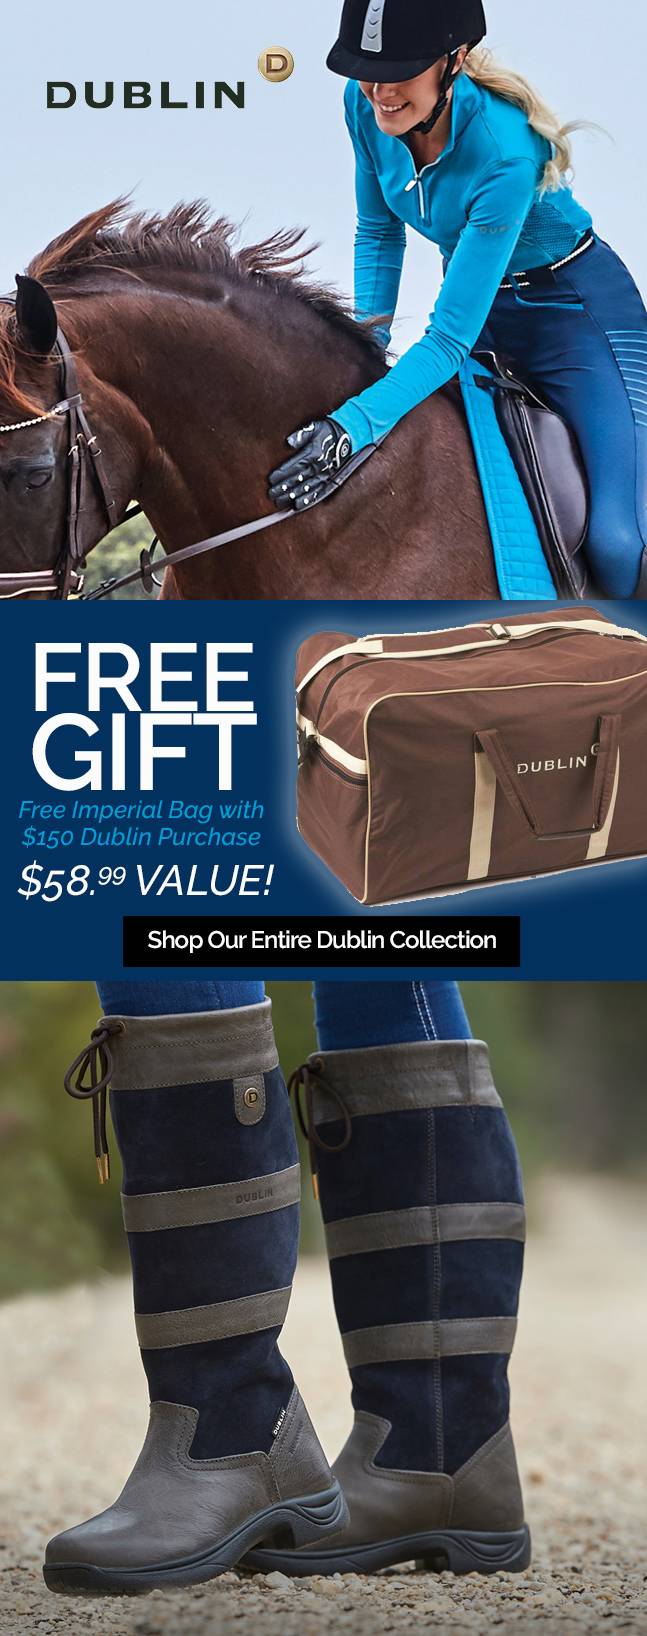 Shop Dublin Collection - FREE Imperial Bag Valued at $58.99